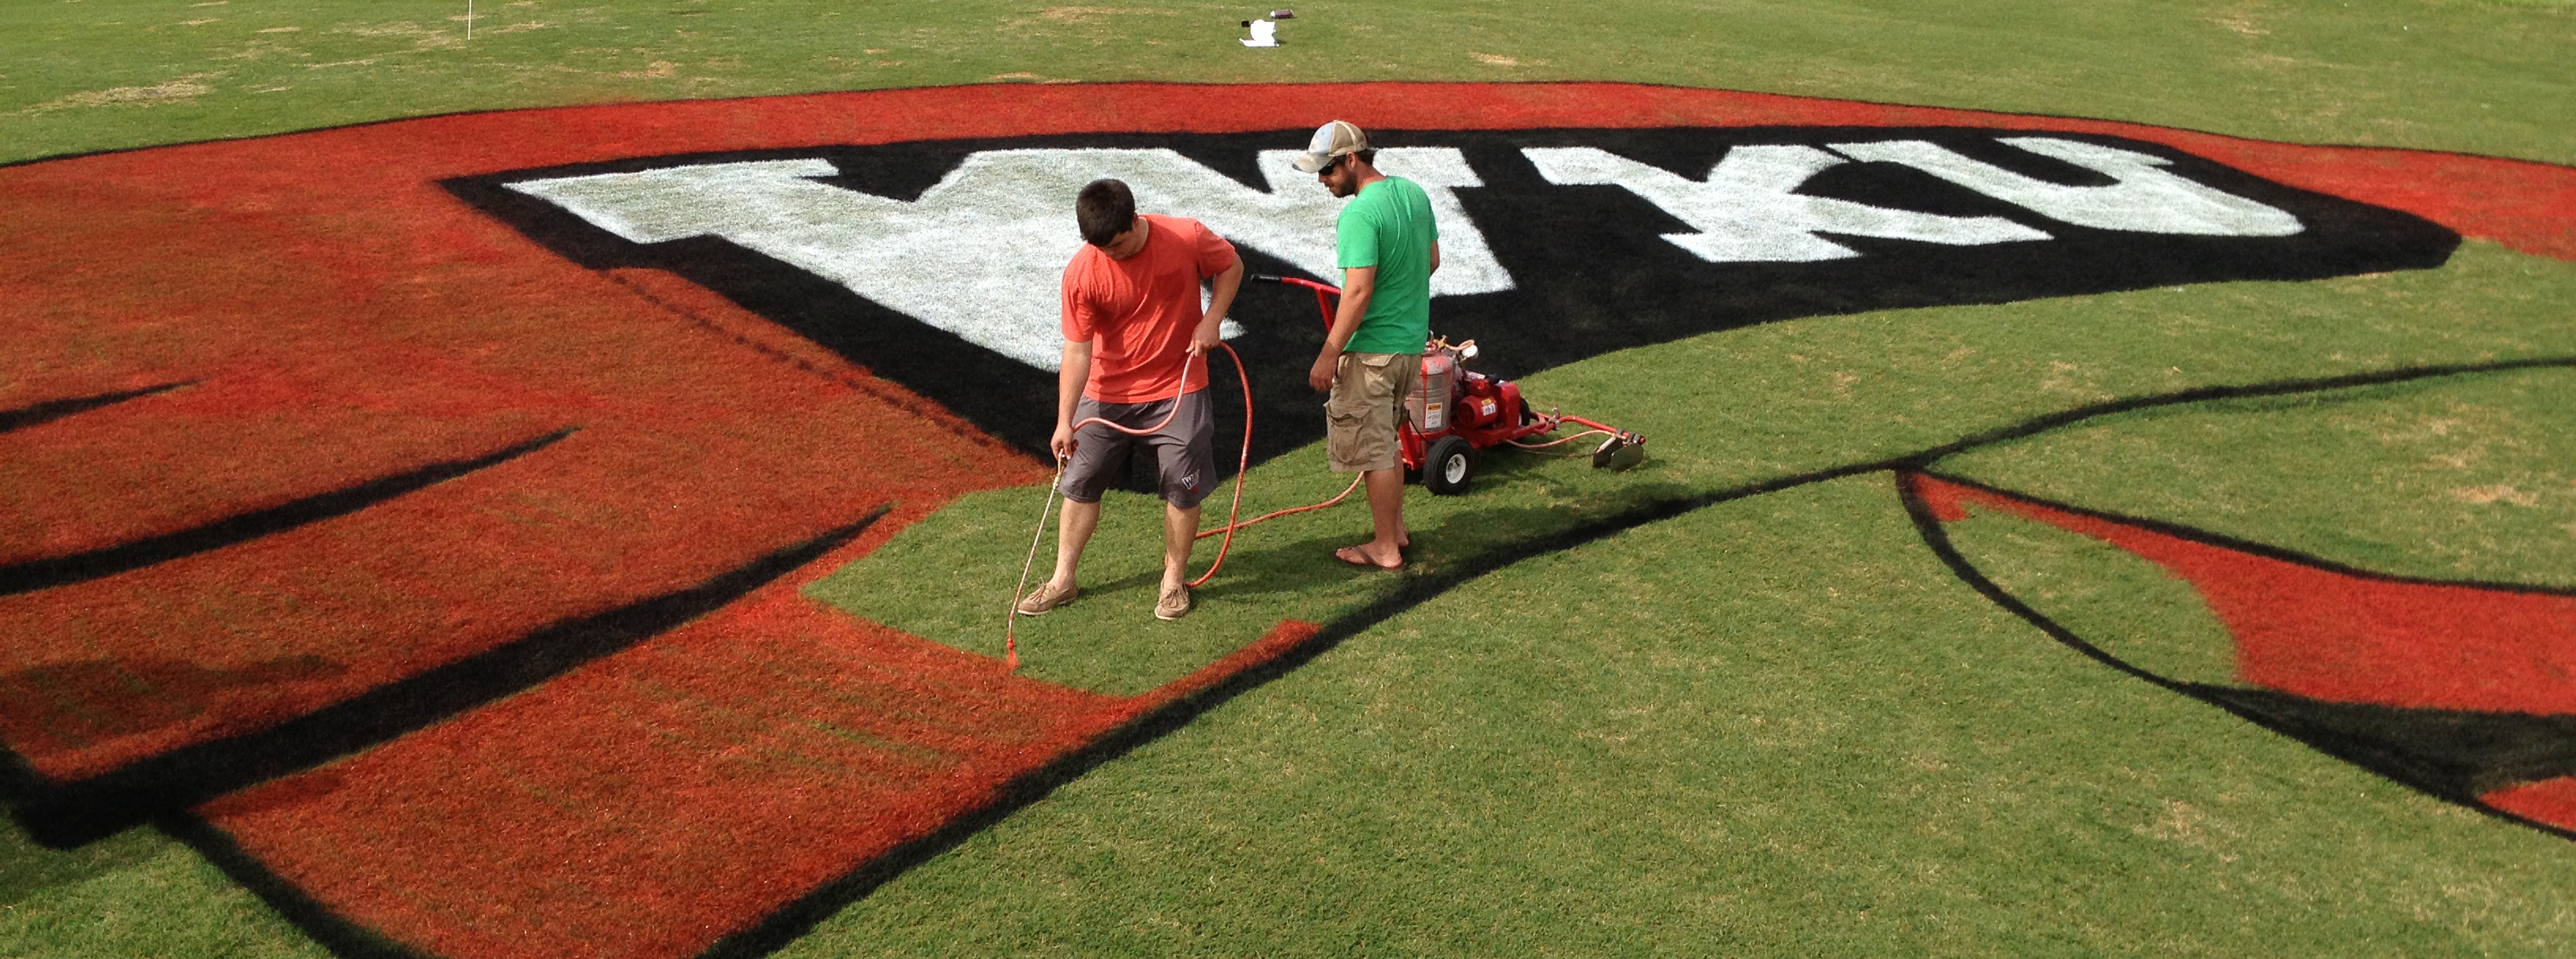 Students painting Red Towel on Turf